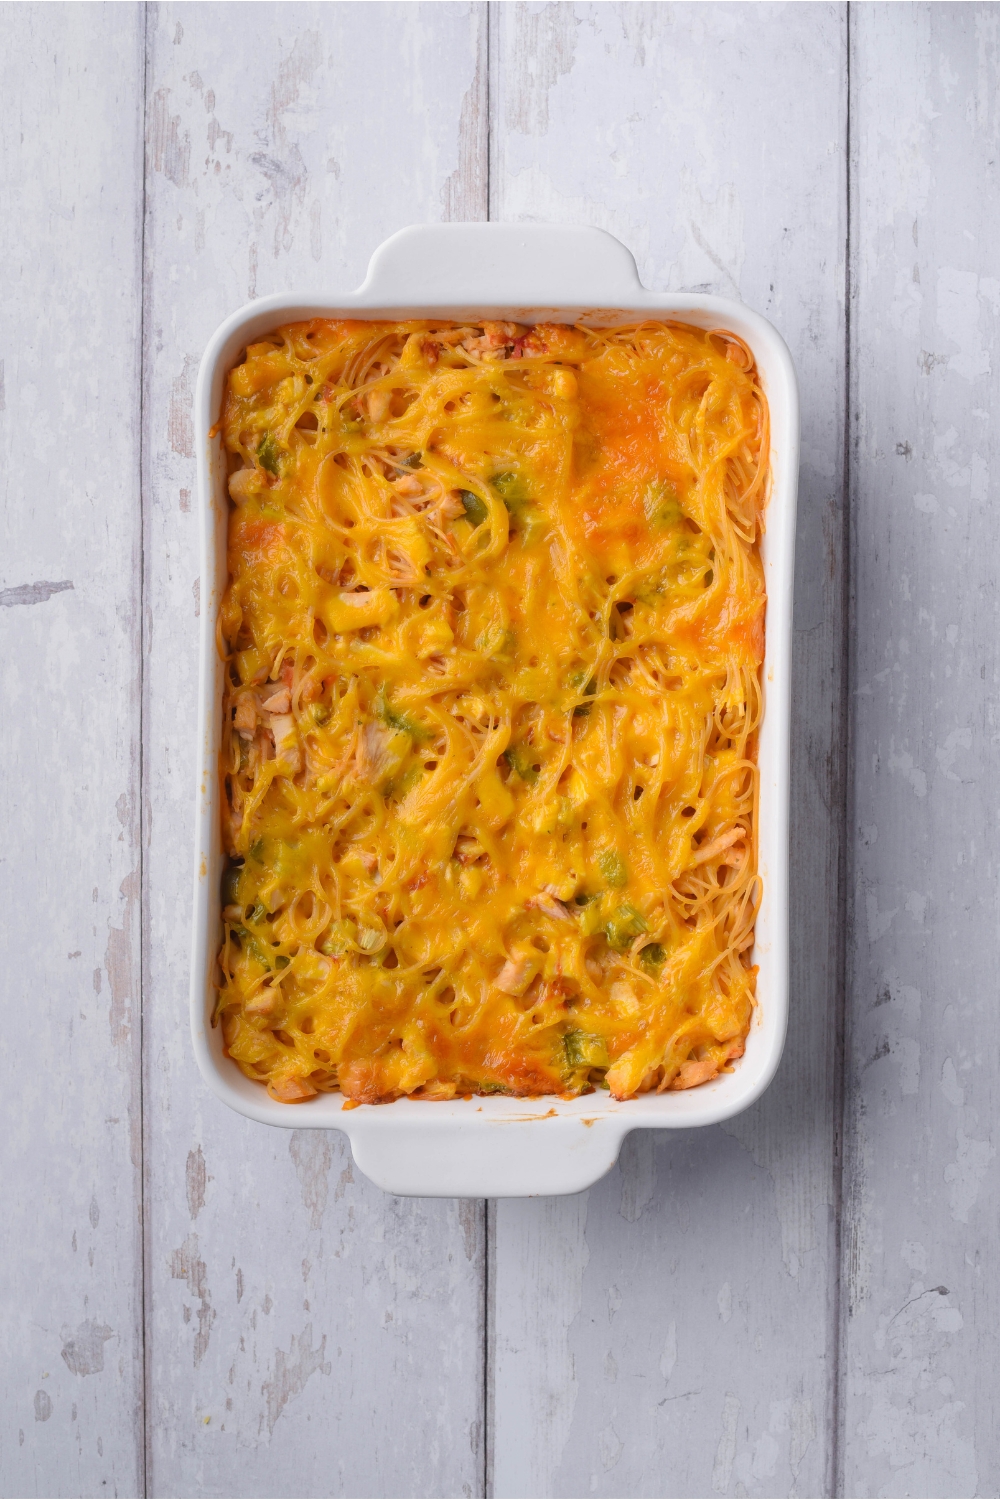 A baked chicken spaghetti casserole covered in melted cheese in a white baking dish.